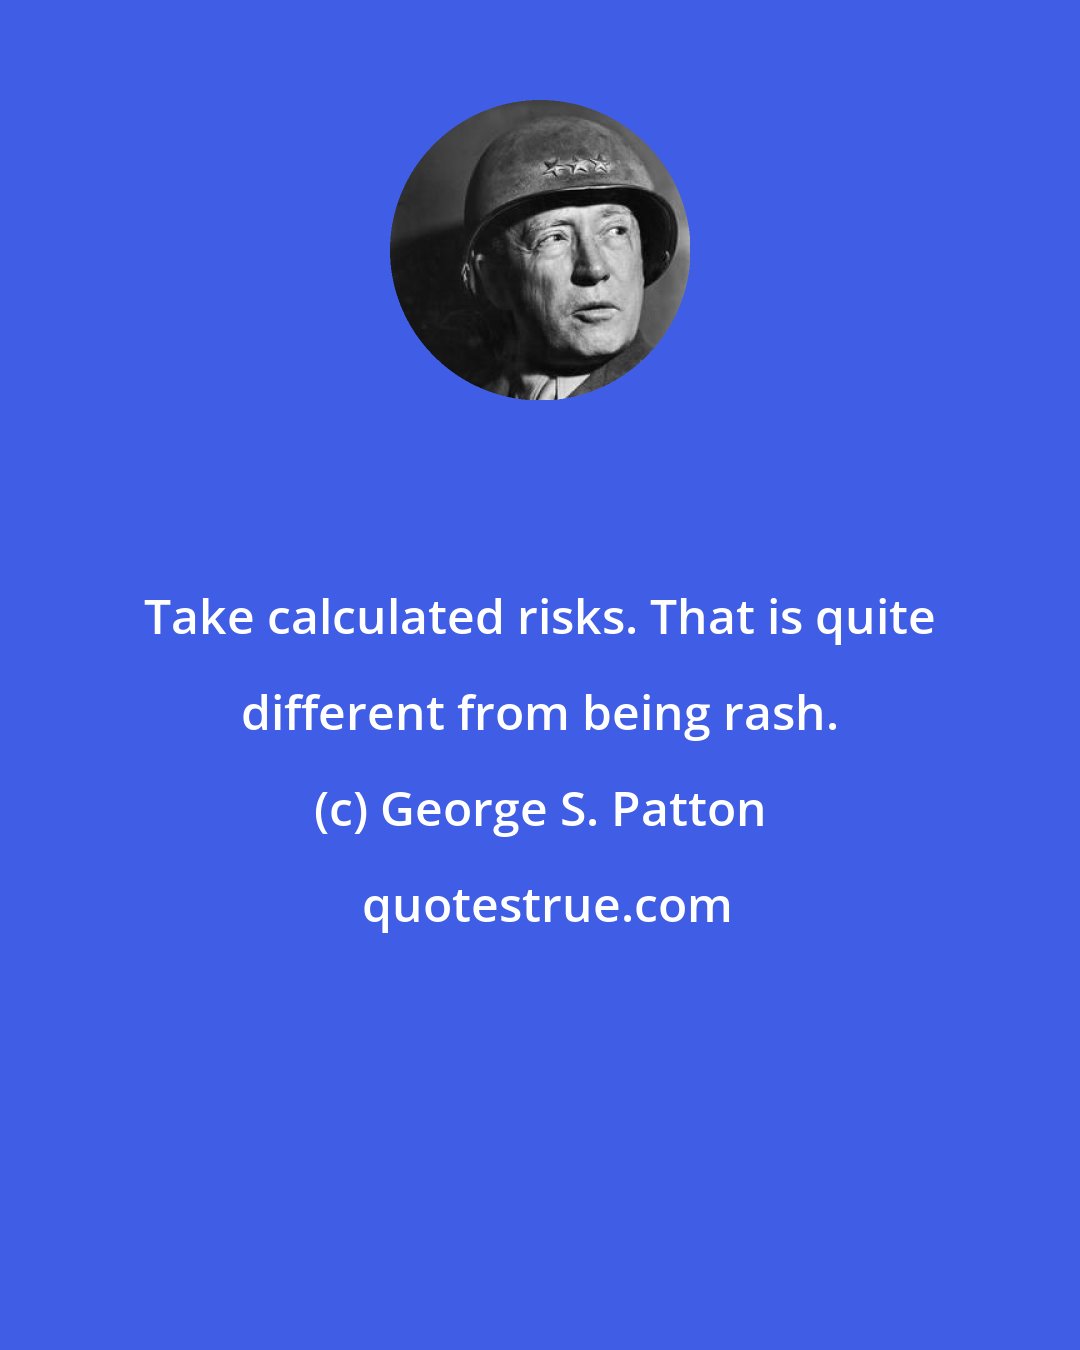 George S. Patton: Take calculated risks. That is quite different from being rash.